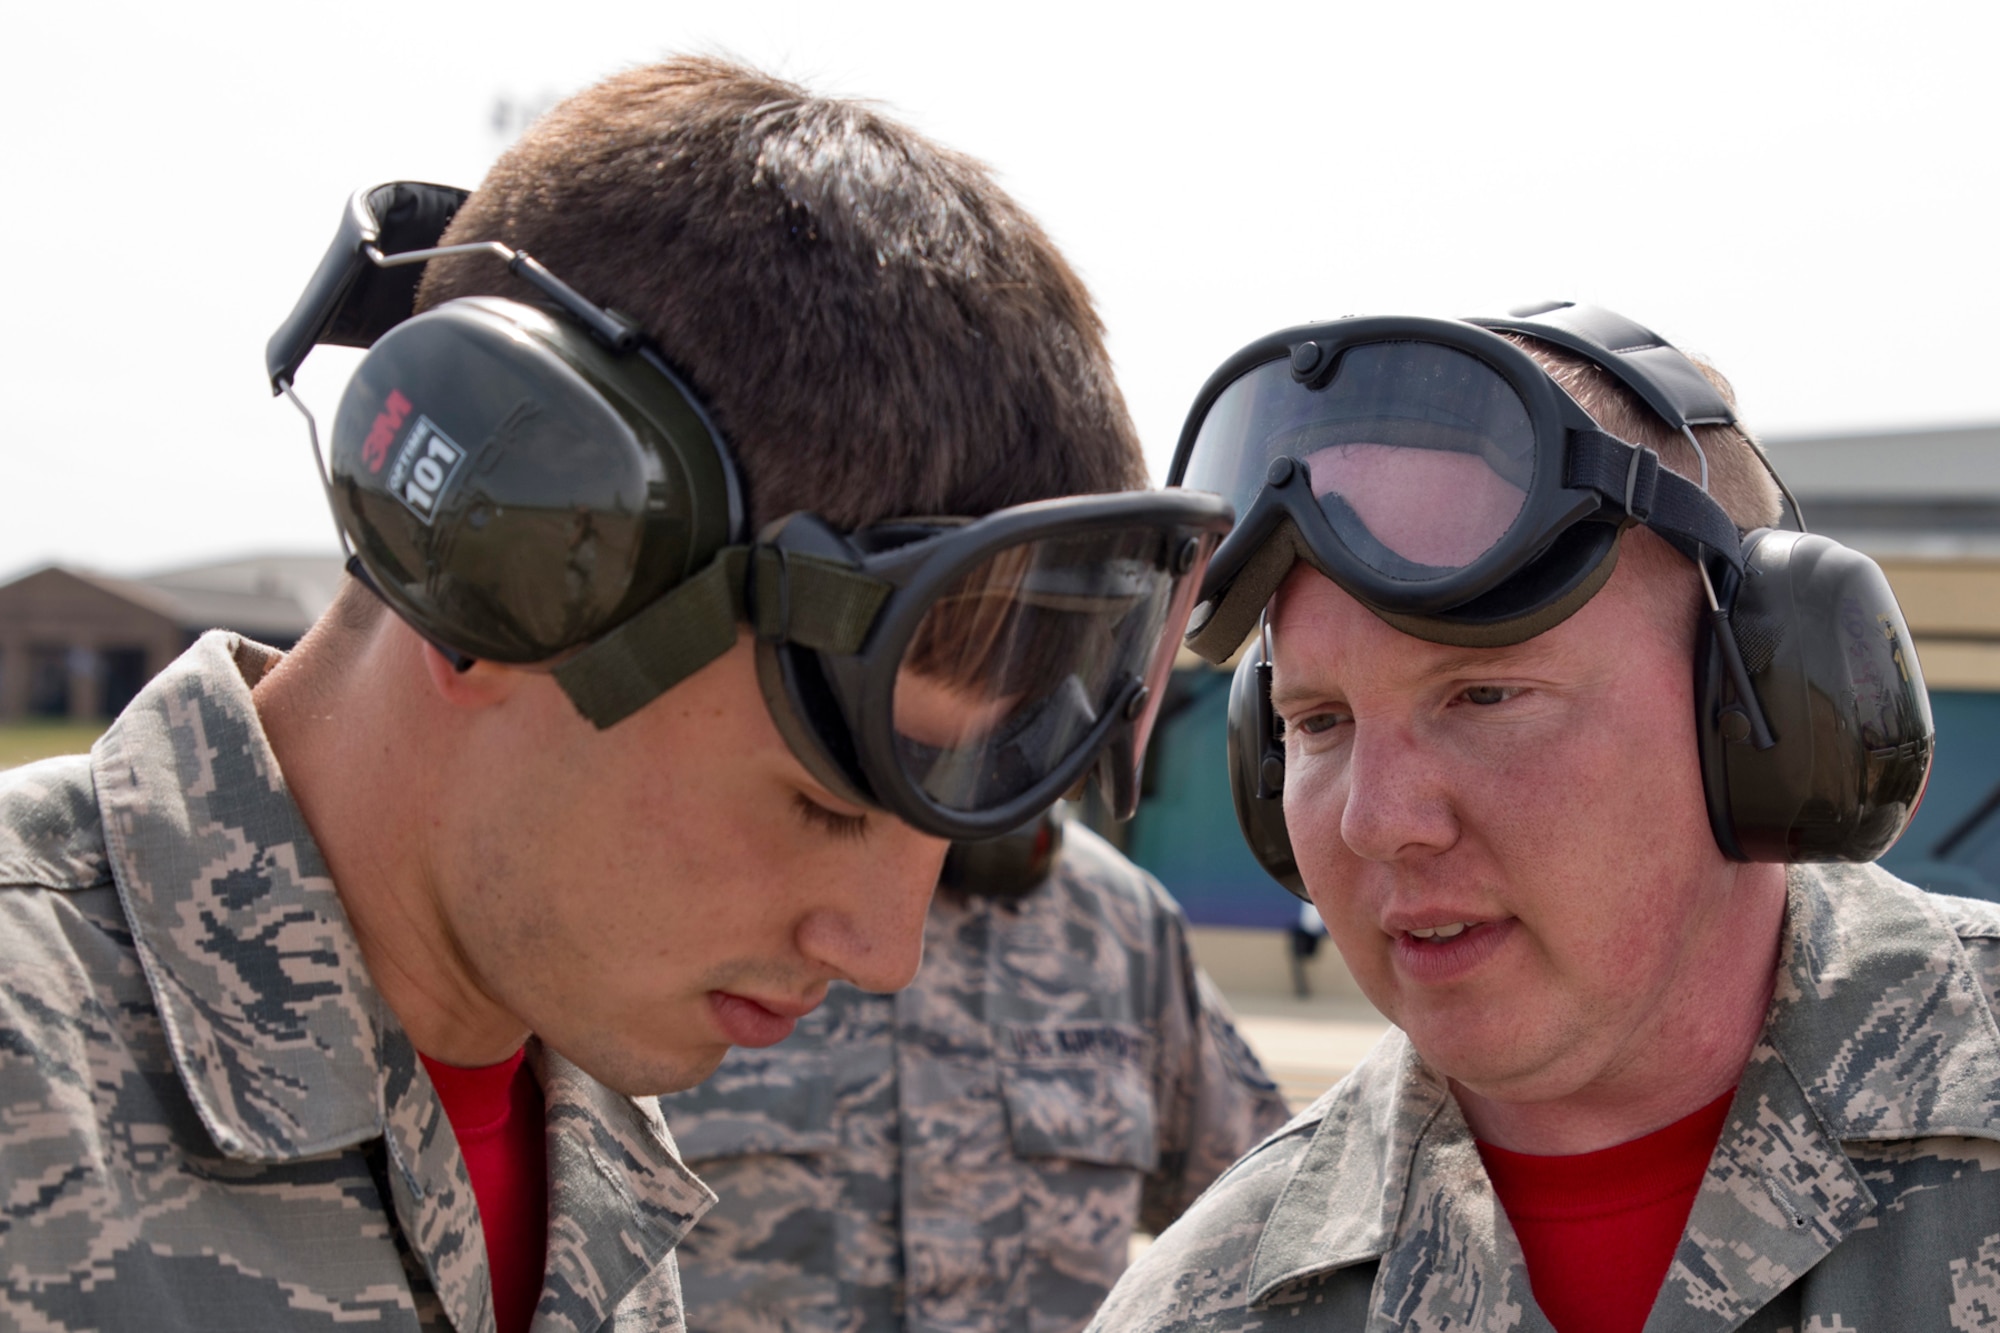 U.S. Air Force Reserve Senior Airman Jacob Carter, air transportation journeyman, 96th Aerial Port Squadron, gets a piece of advice from Tech Sgt. Jason Gibson, air transportation journeyman, 96 APS, during a training exercise April 2, 2017, at Little Rock Air Force Base, Ark. The two Airmen are part of a team preparing for a competition between air mobility professionals. (U.S. Air Force photo by Master Sgt. Jeff Walston/Released)